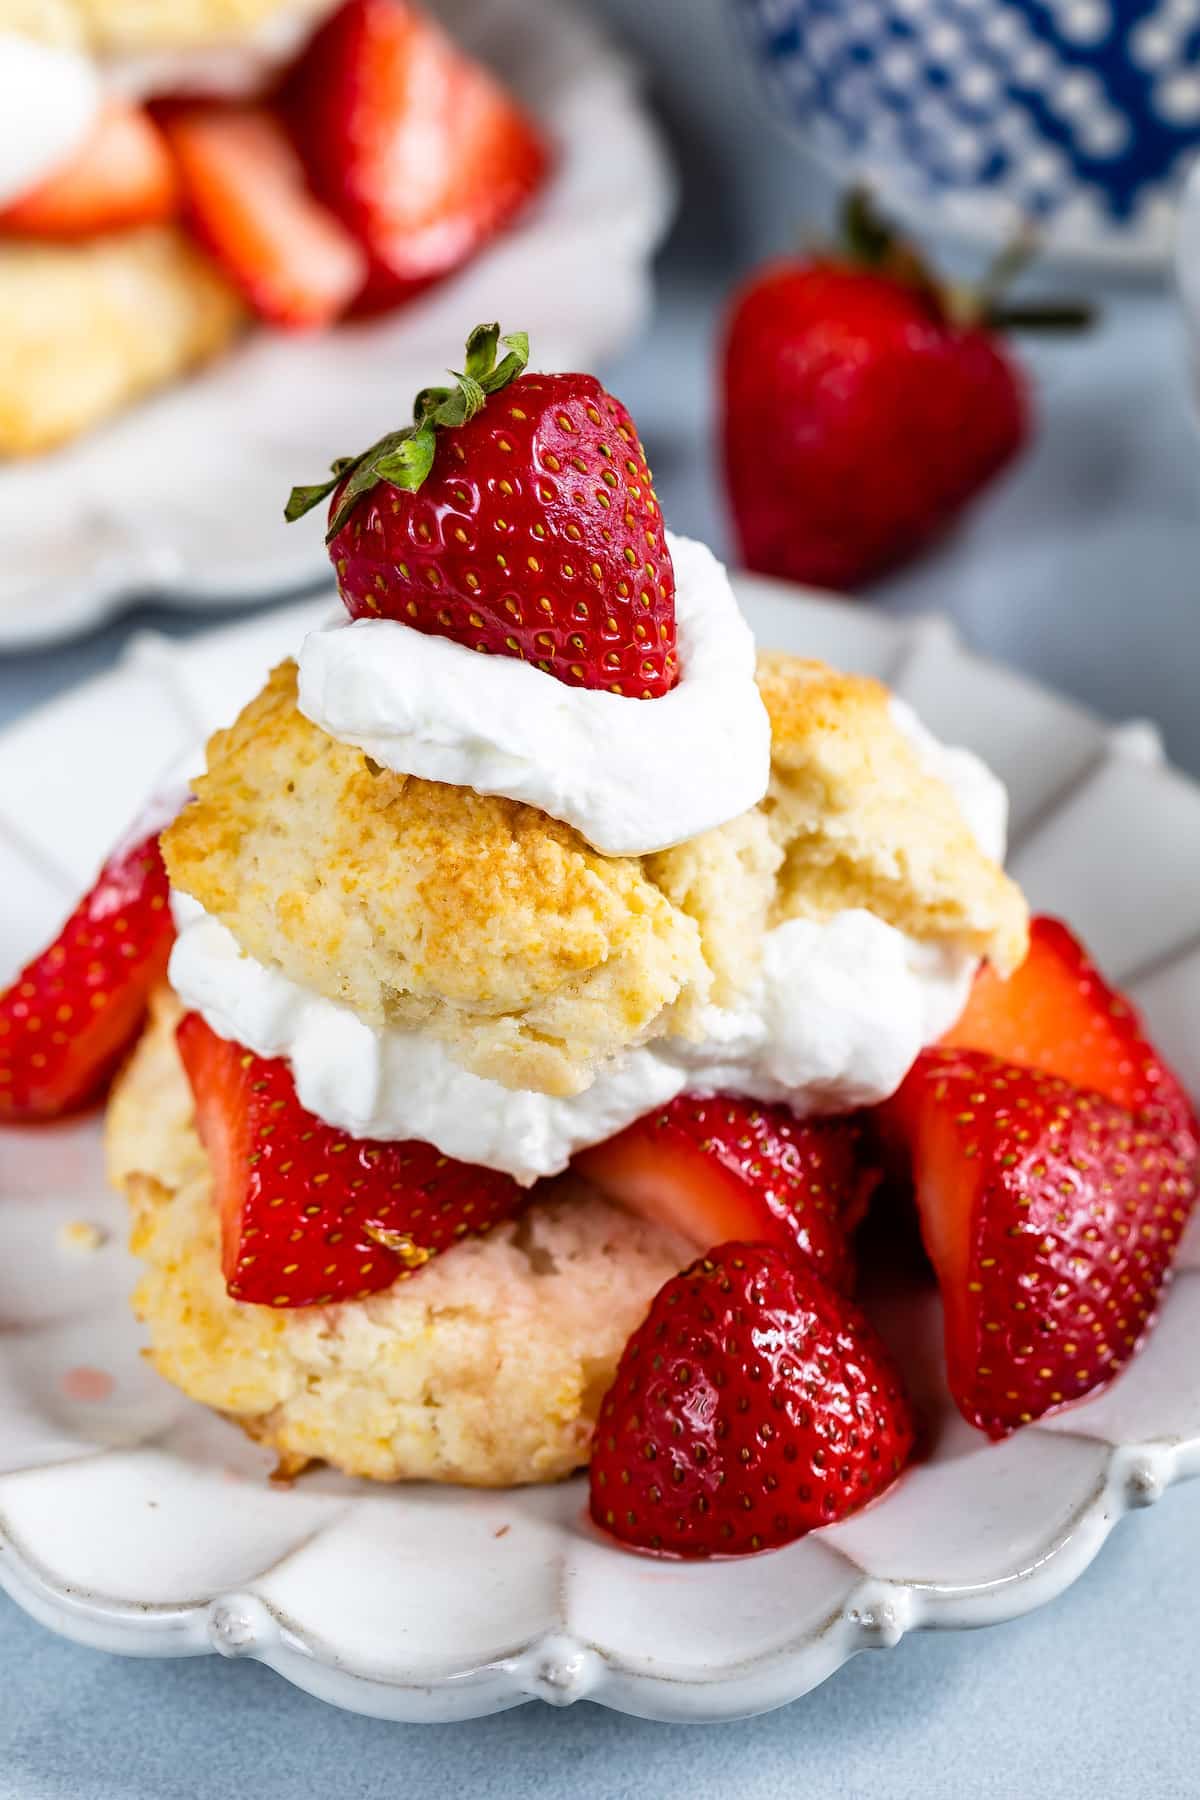 biscuits and strawberries and cream stacked on a white plate.